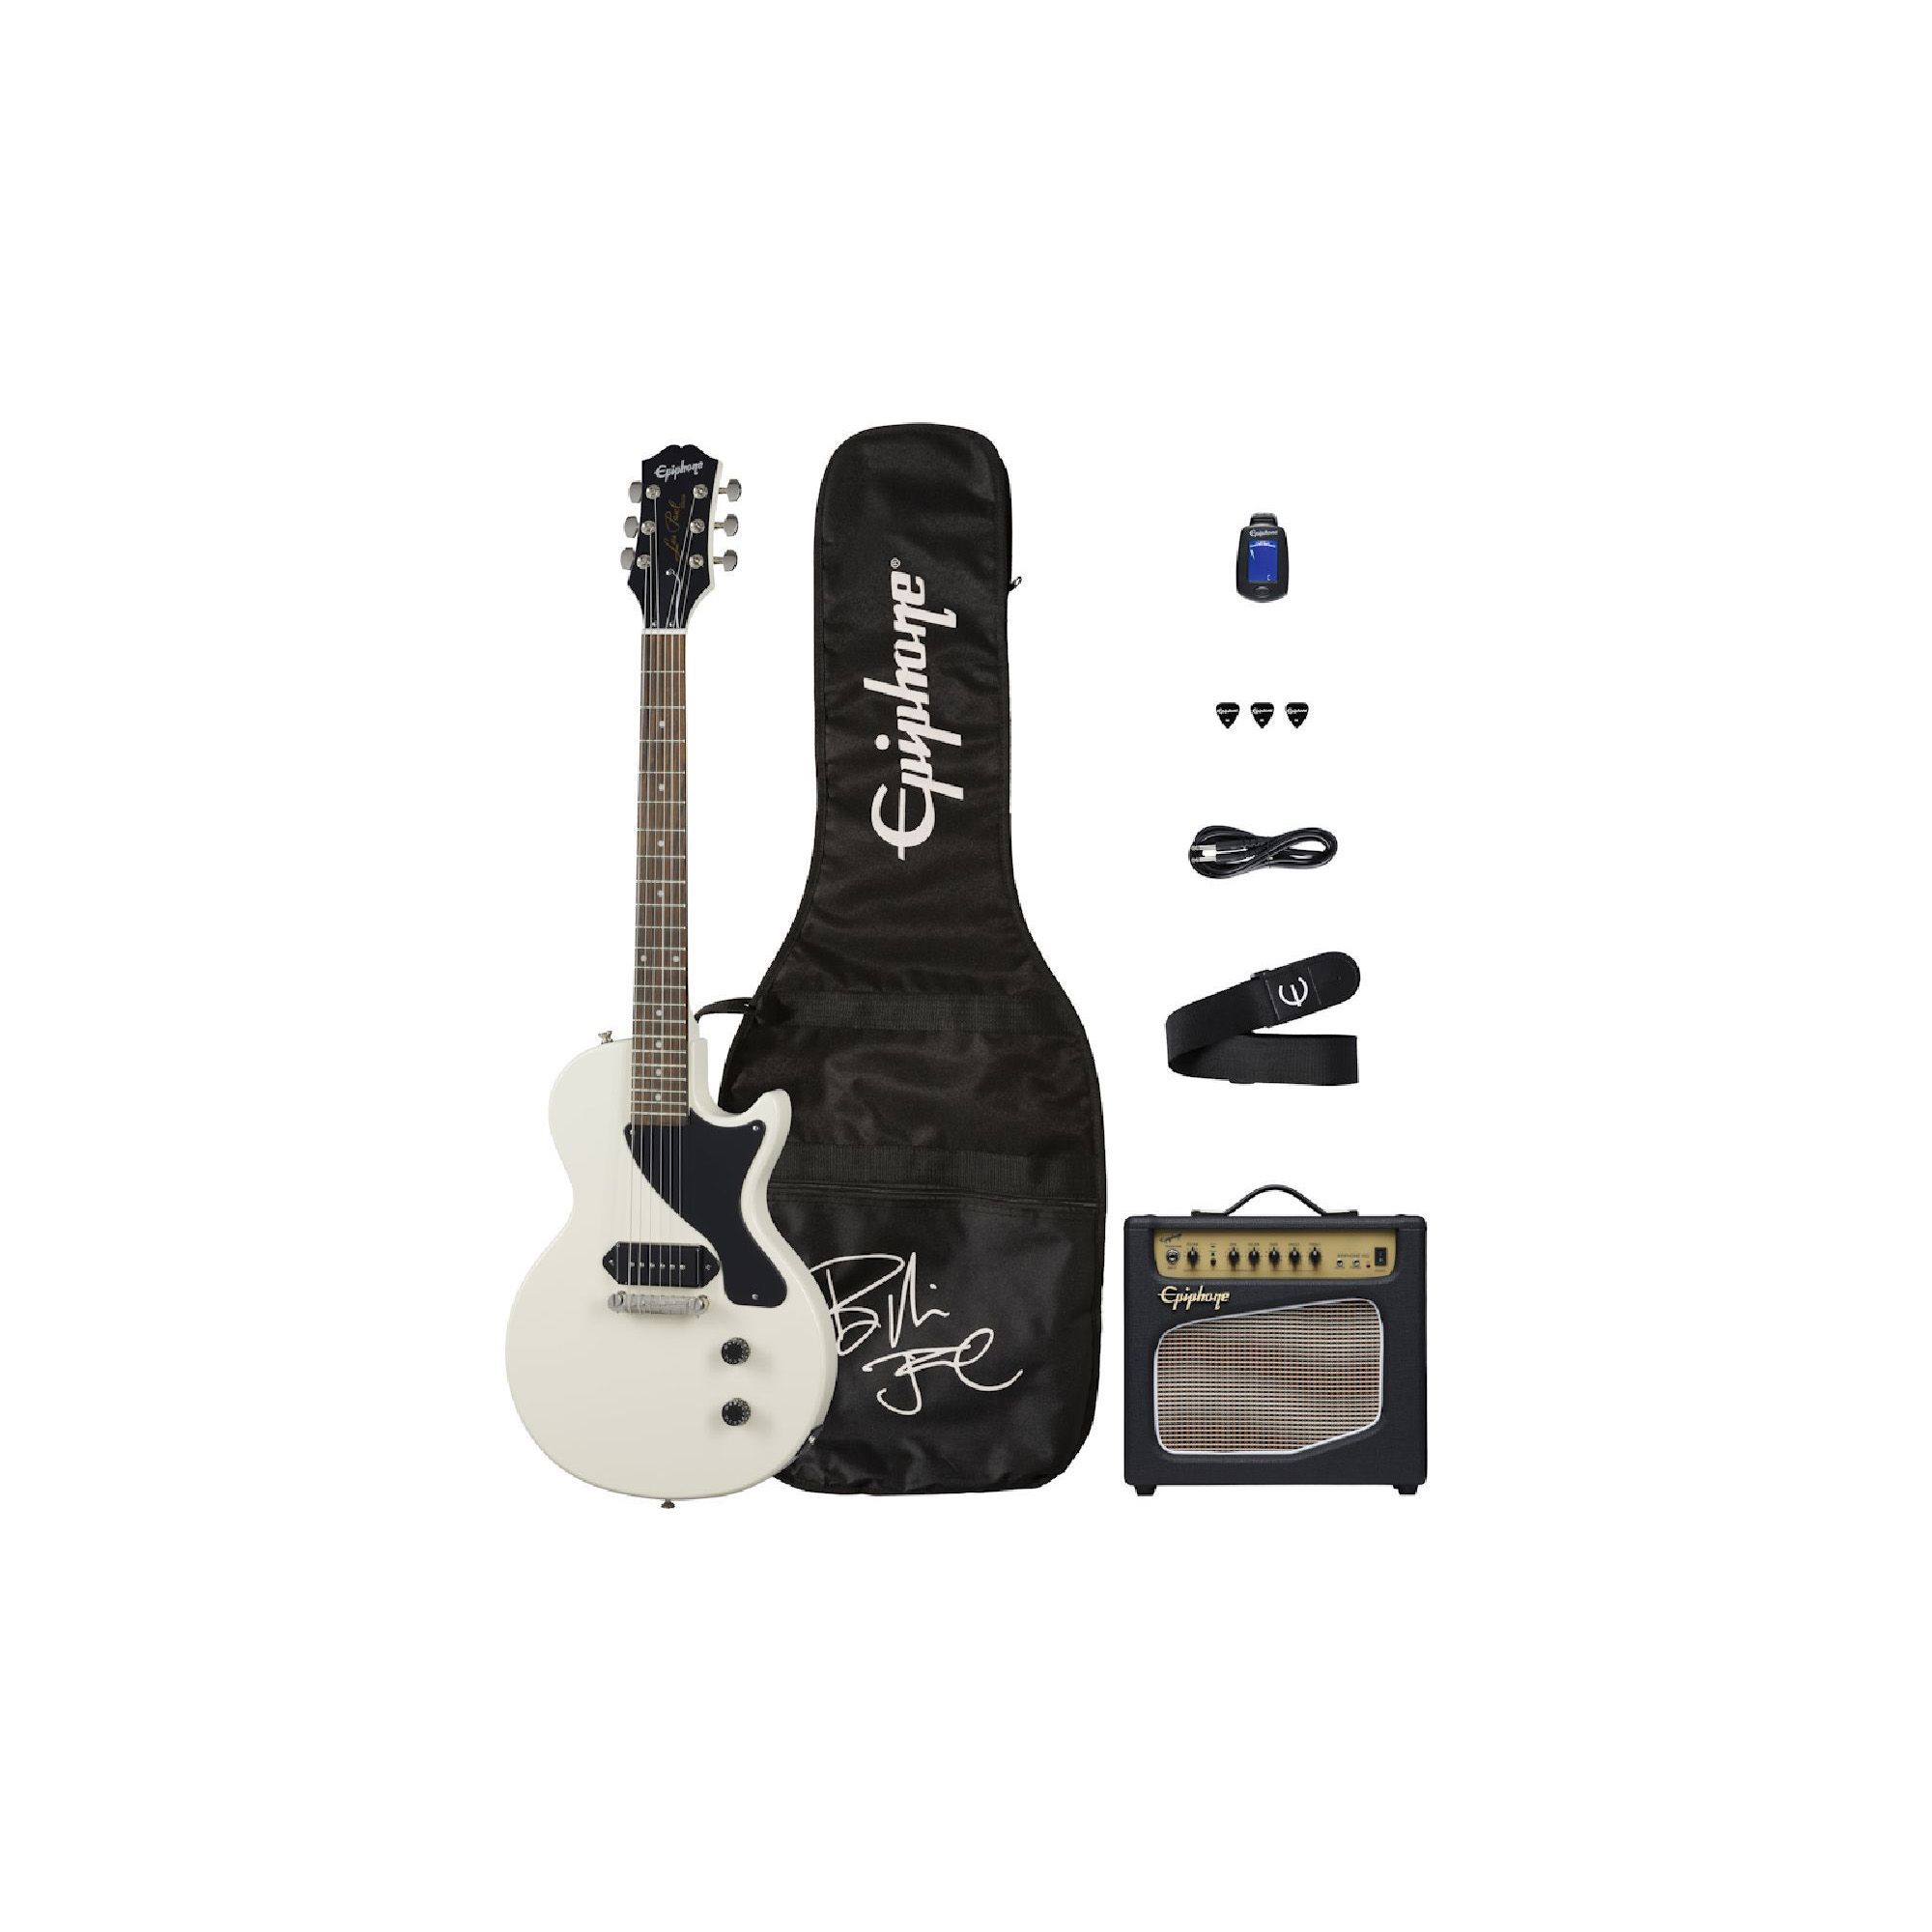 Epiphone Billie Joe Armstrong Les Paul Junior Electric Guitar Player Pack 220V Classic White Электрогитары